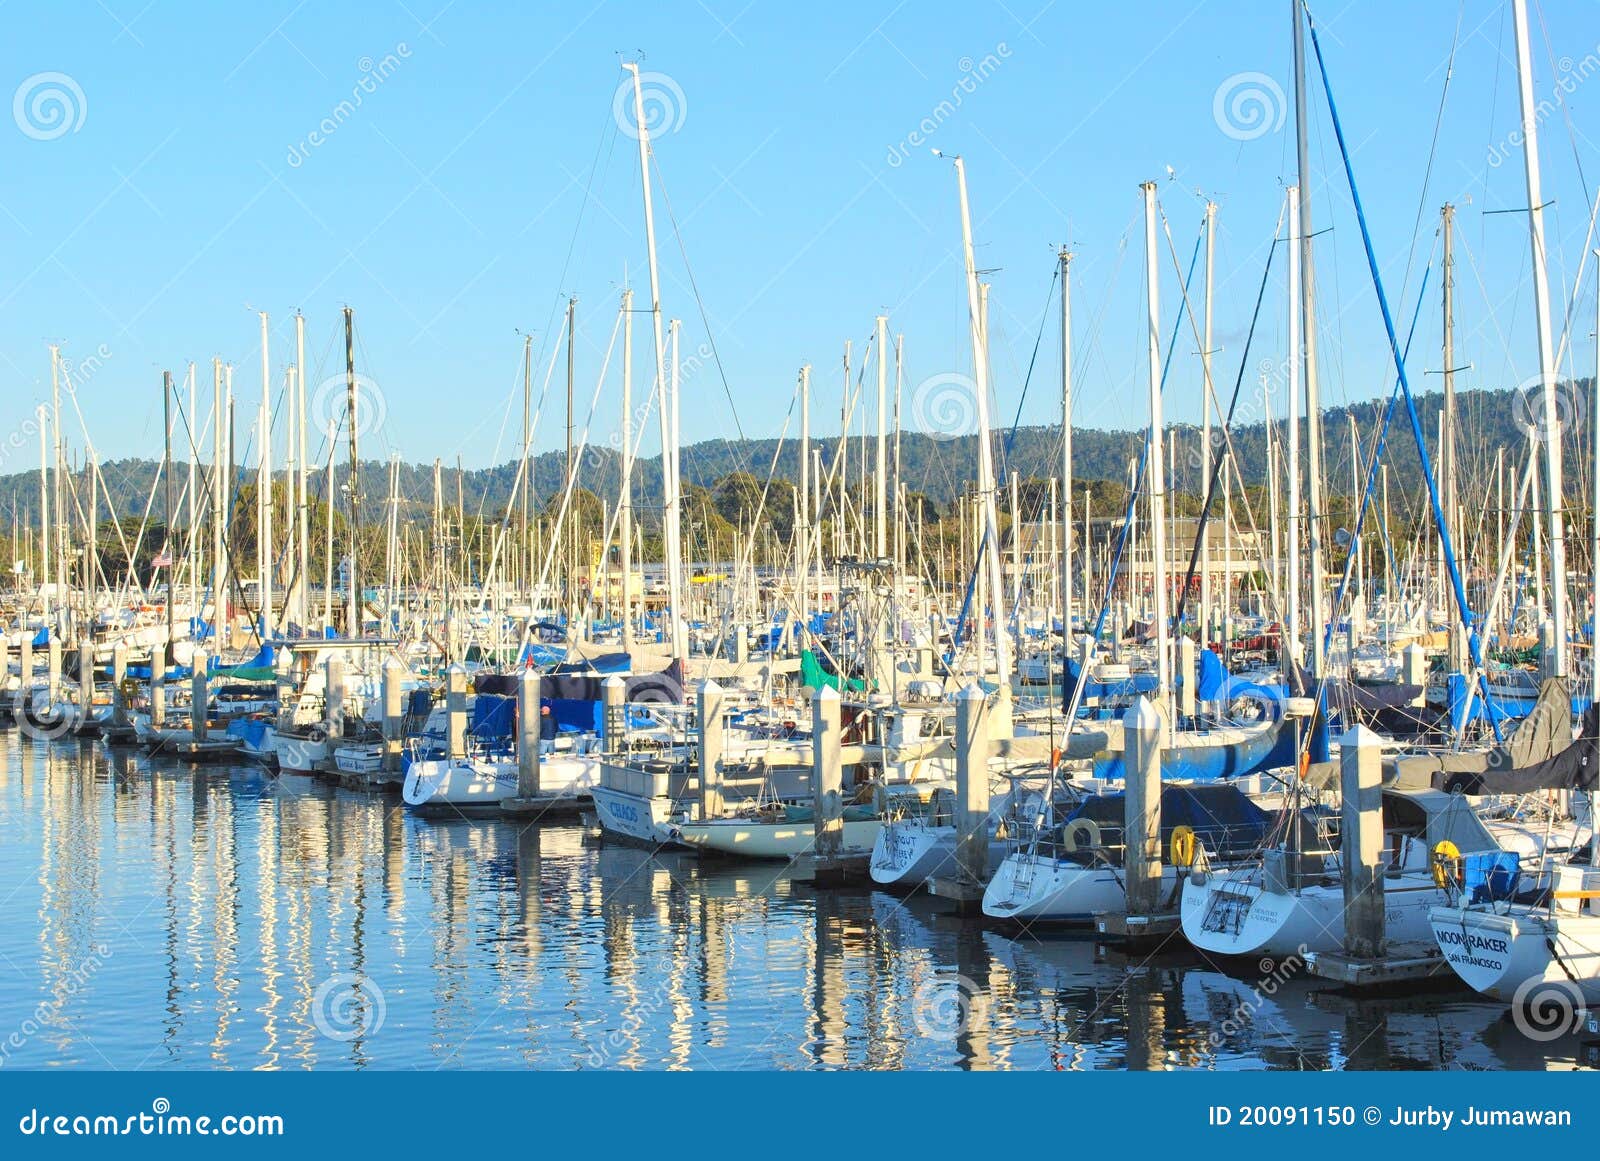 Old Fisherman S Wharf Monterey Editorial Image - Image of ocean, yacht ...